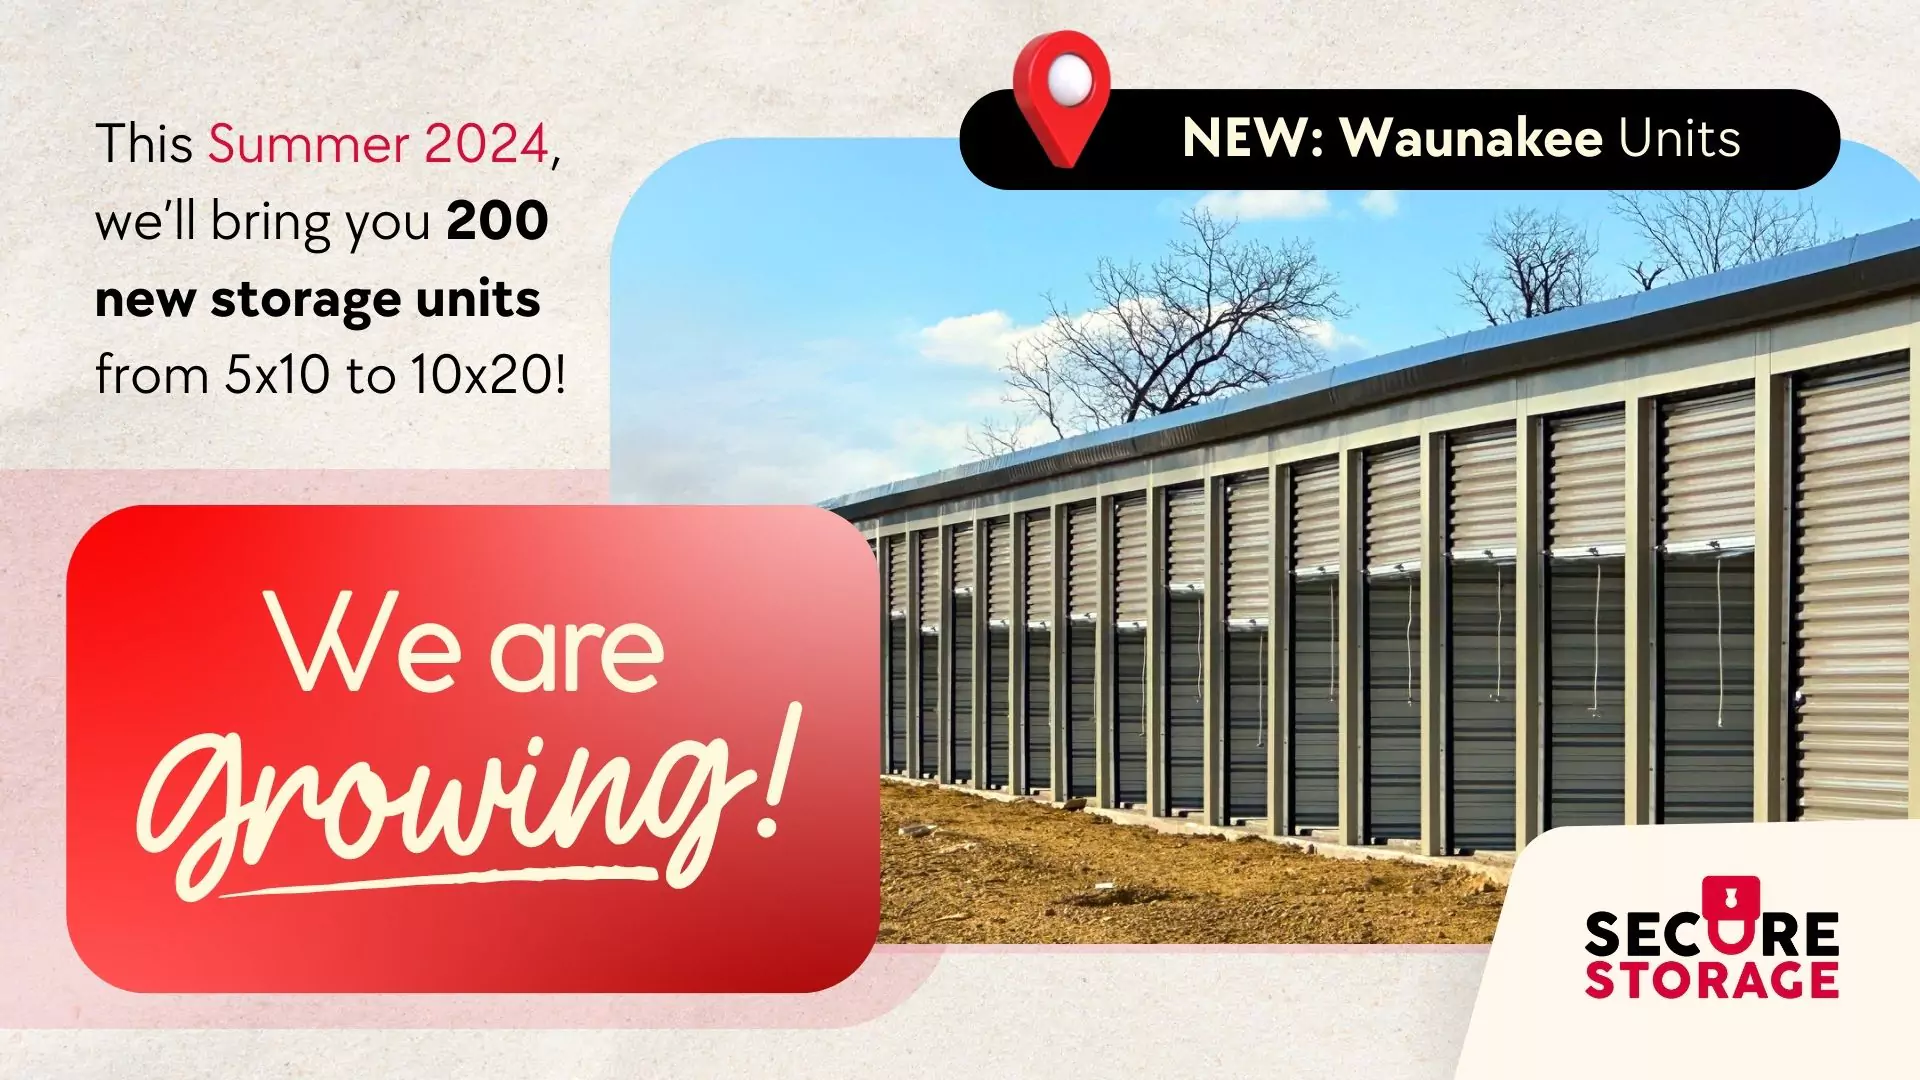 Waunakee - We are growing